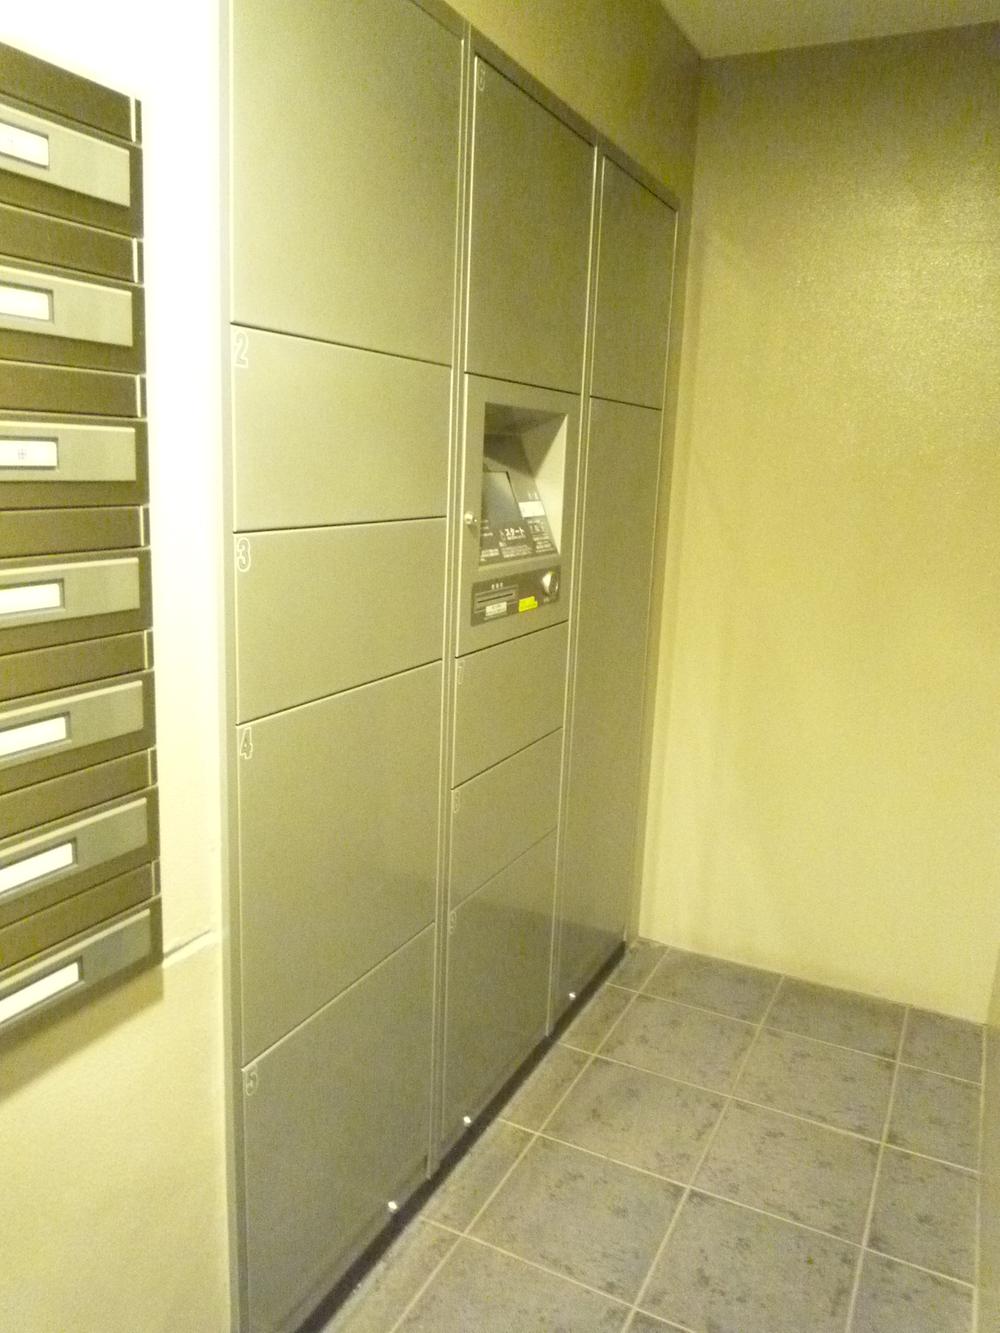 Other common areas. Common areas ・ Home delivery locker (2013 October shooting)